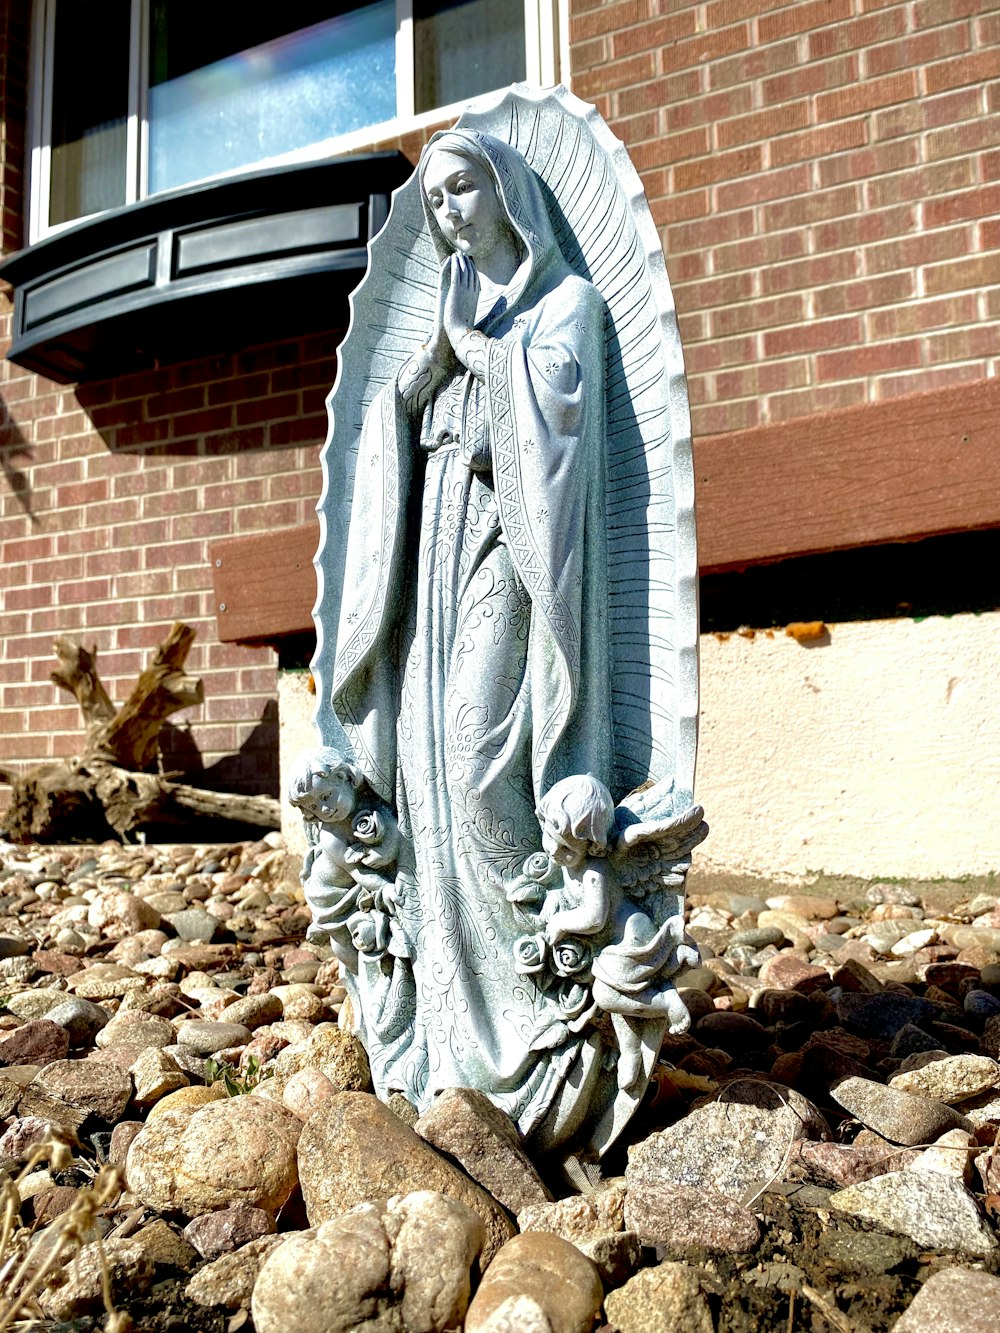 a statue of the virgin mary in front of a brick building